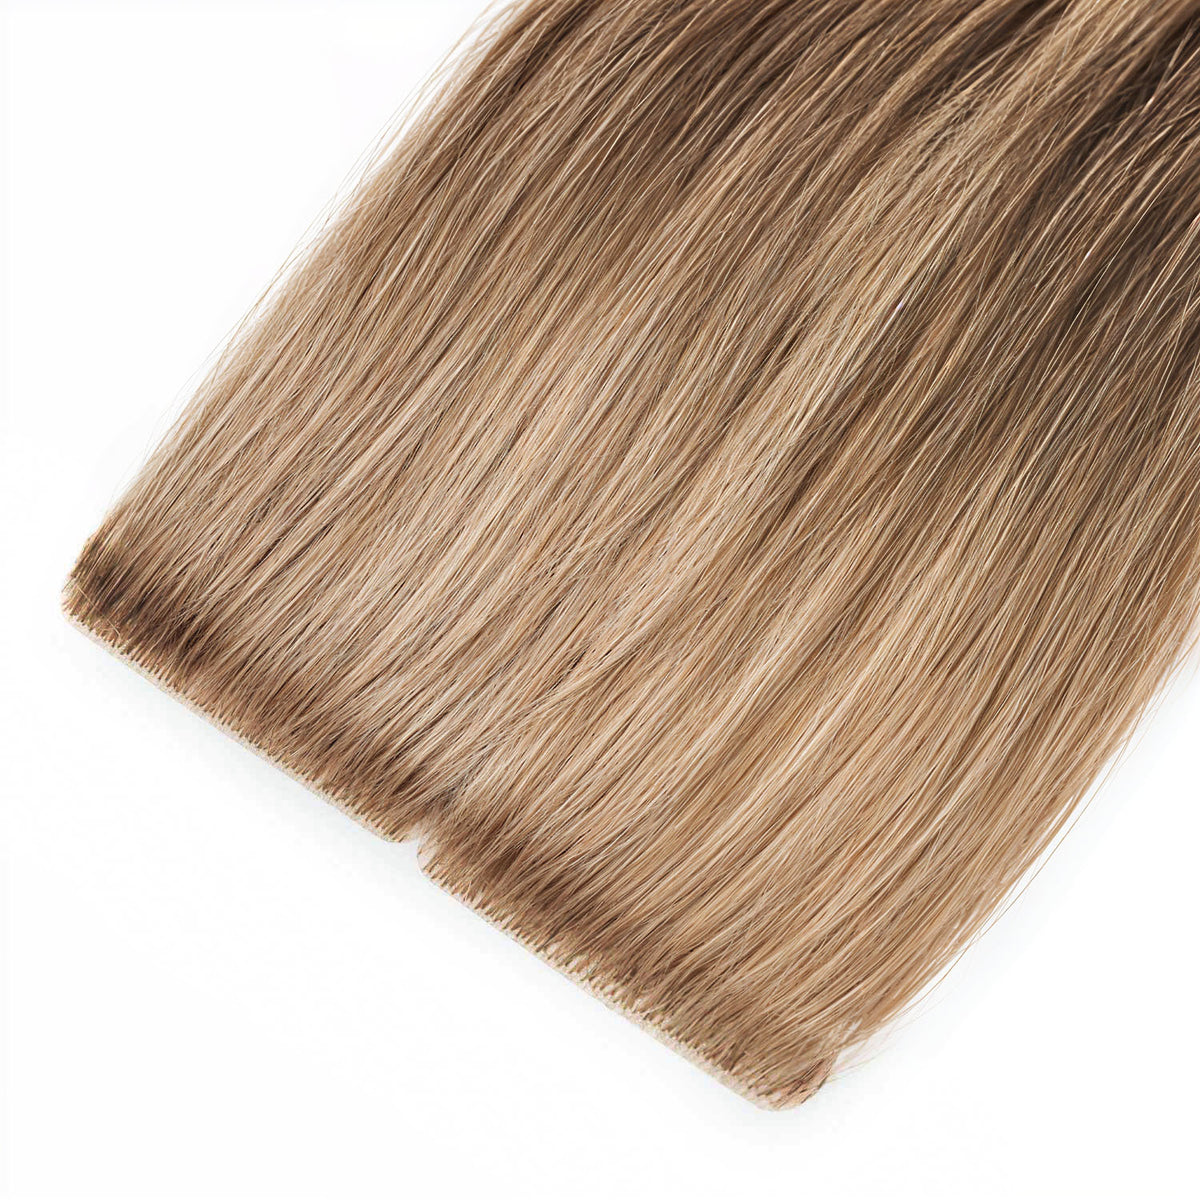 Get a natural and undetectable look with Secret Tape Hair Extensions. These high-quality extensions blend effortlessly with your natural hair, adding length and volume for a flawless appearance.